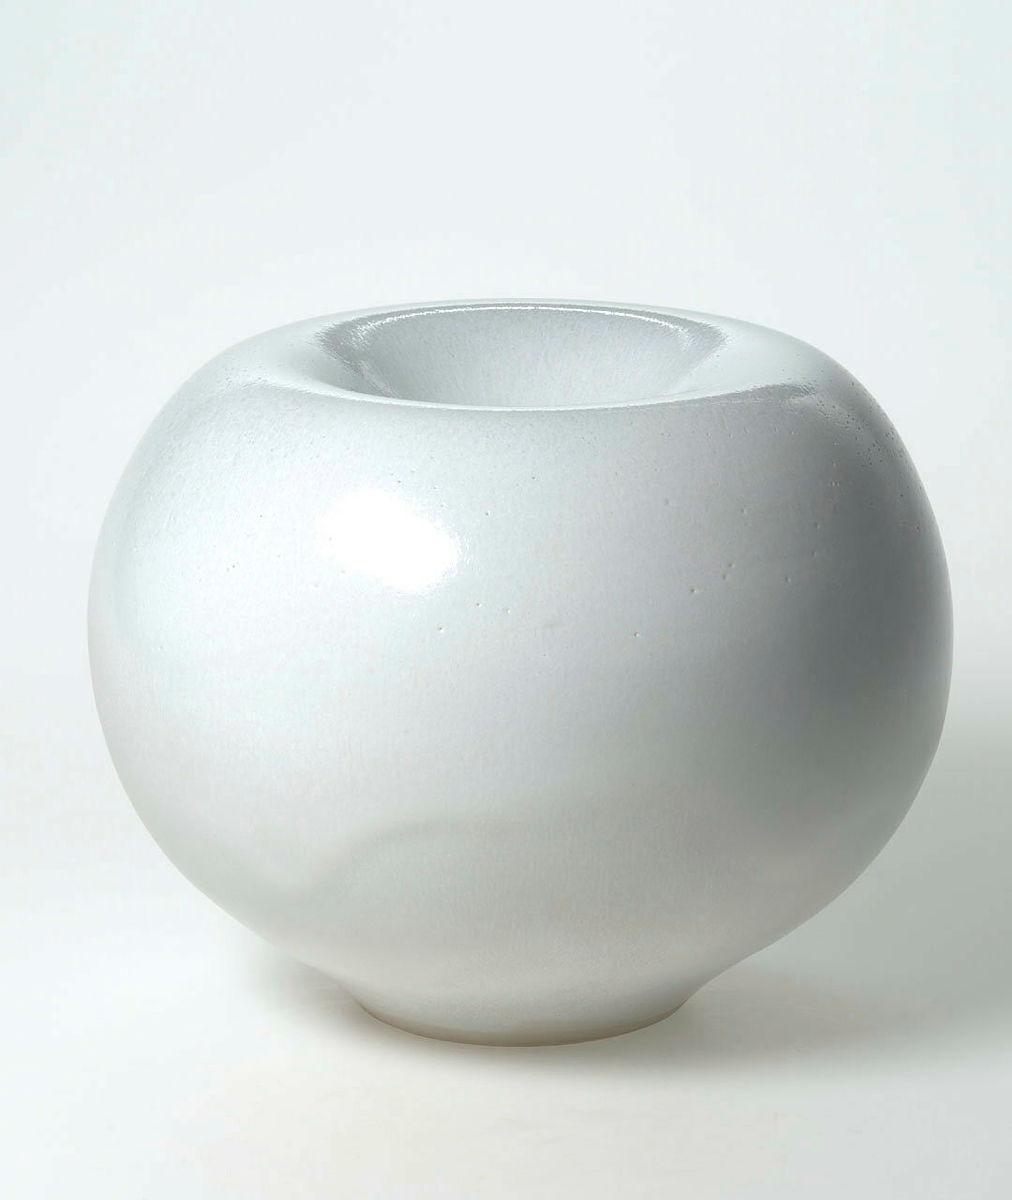 Artwork Vase this artwork made of Stoneware, thrown white stoneware clay of spherical form and indented with white matt opaque glaze.  Reduction firing at 1280 degrees Celsius, created in 1977-01-01